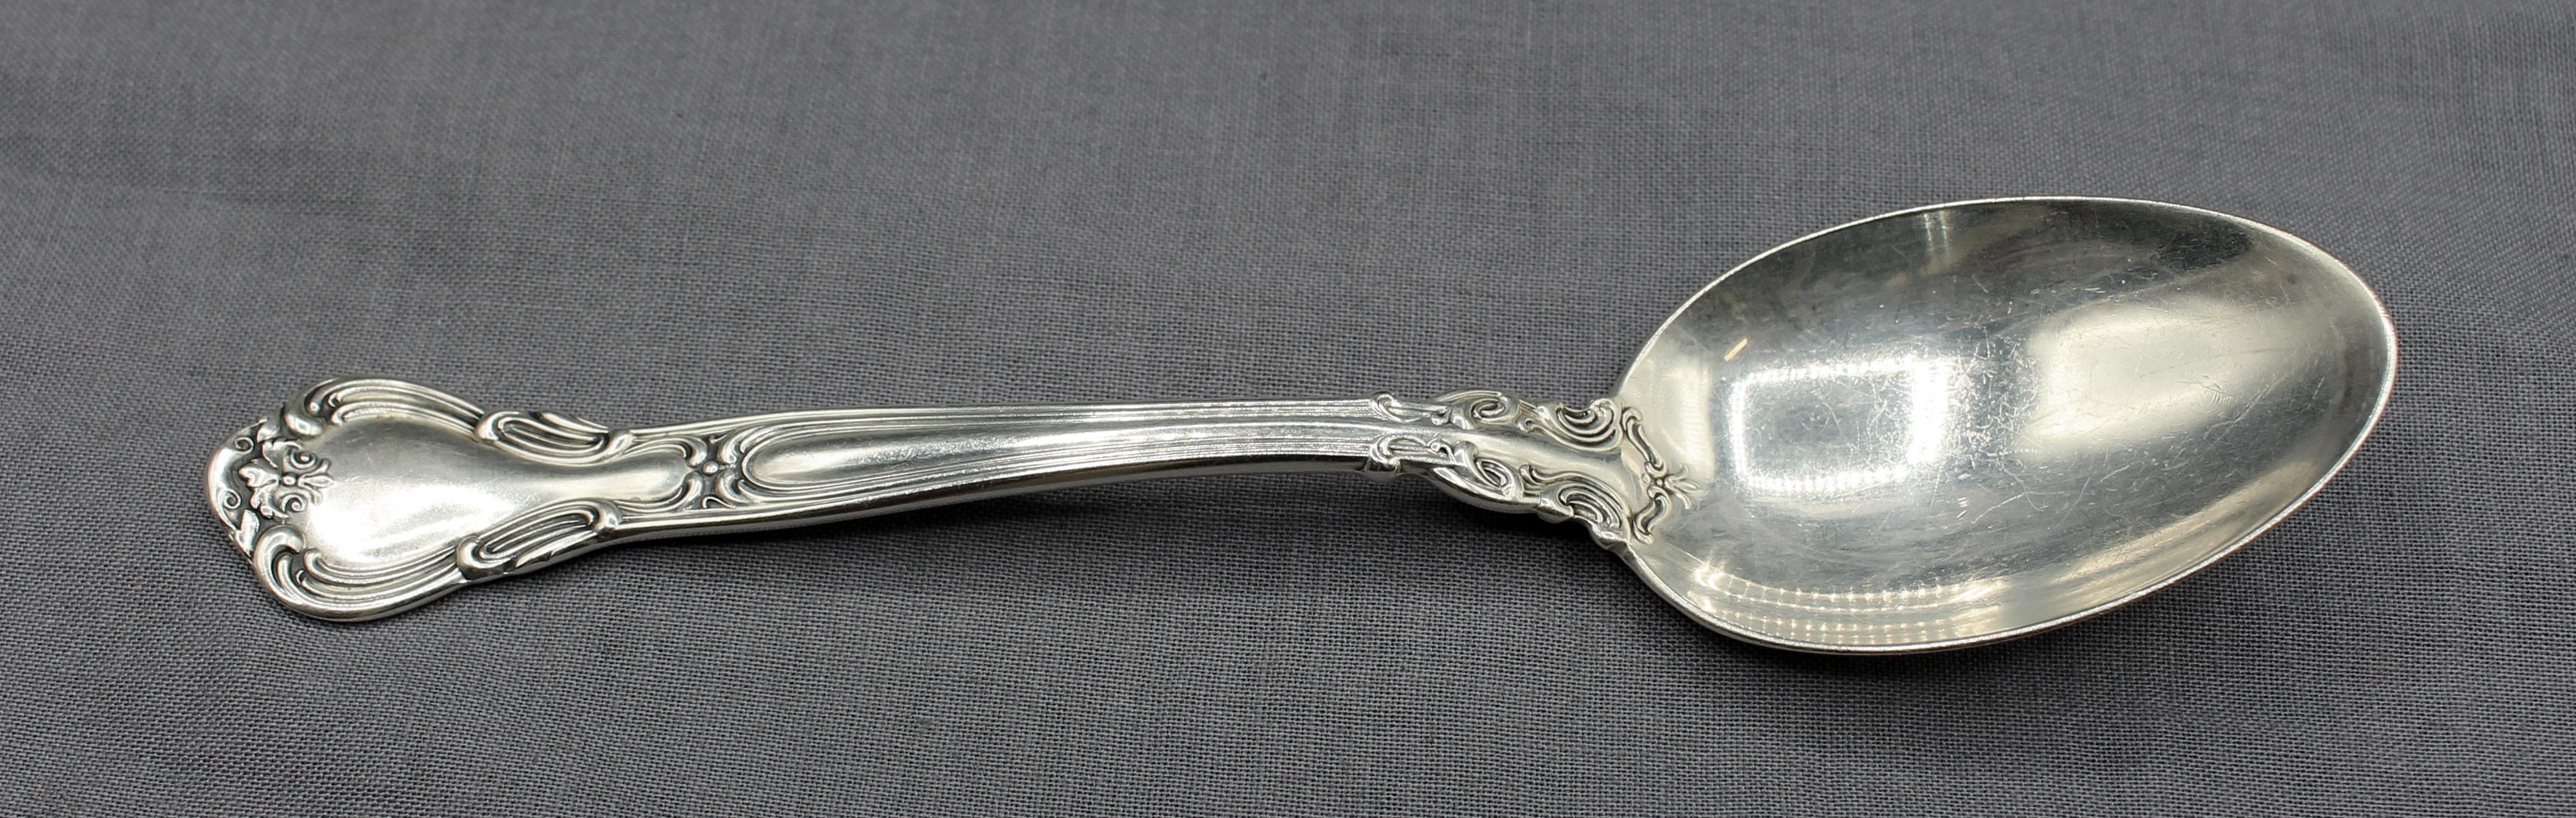 Modern Circa 1970s Set of 4 Chantilly Sterling Teaspoons by Gorham